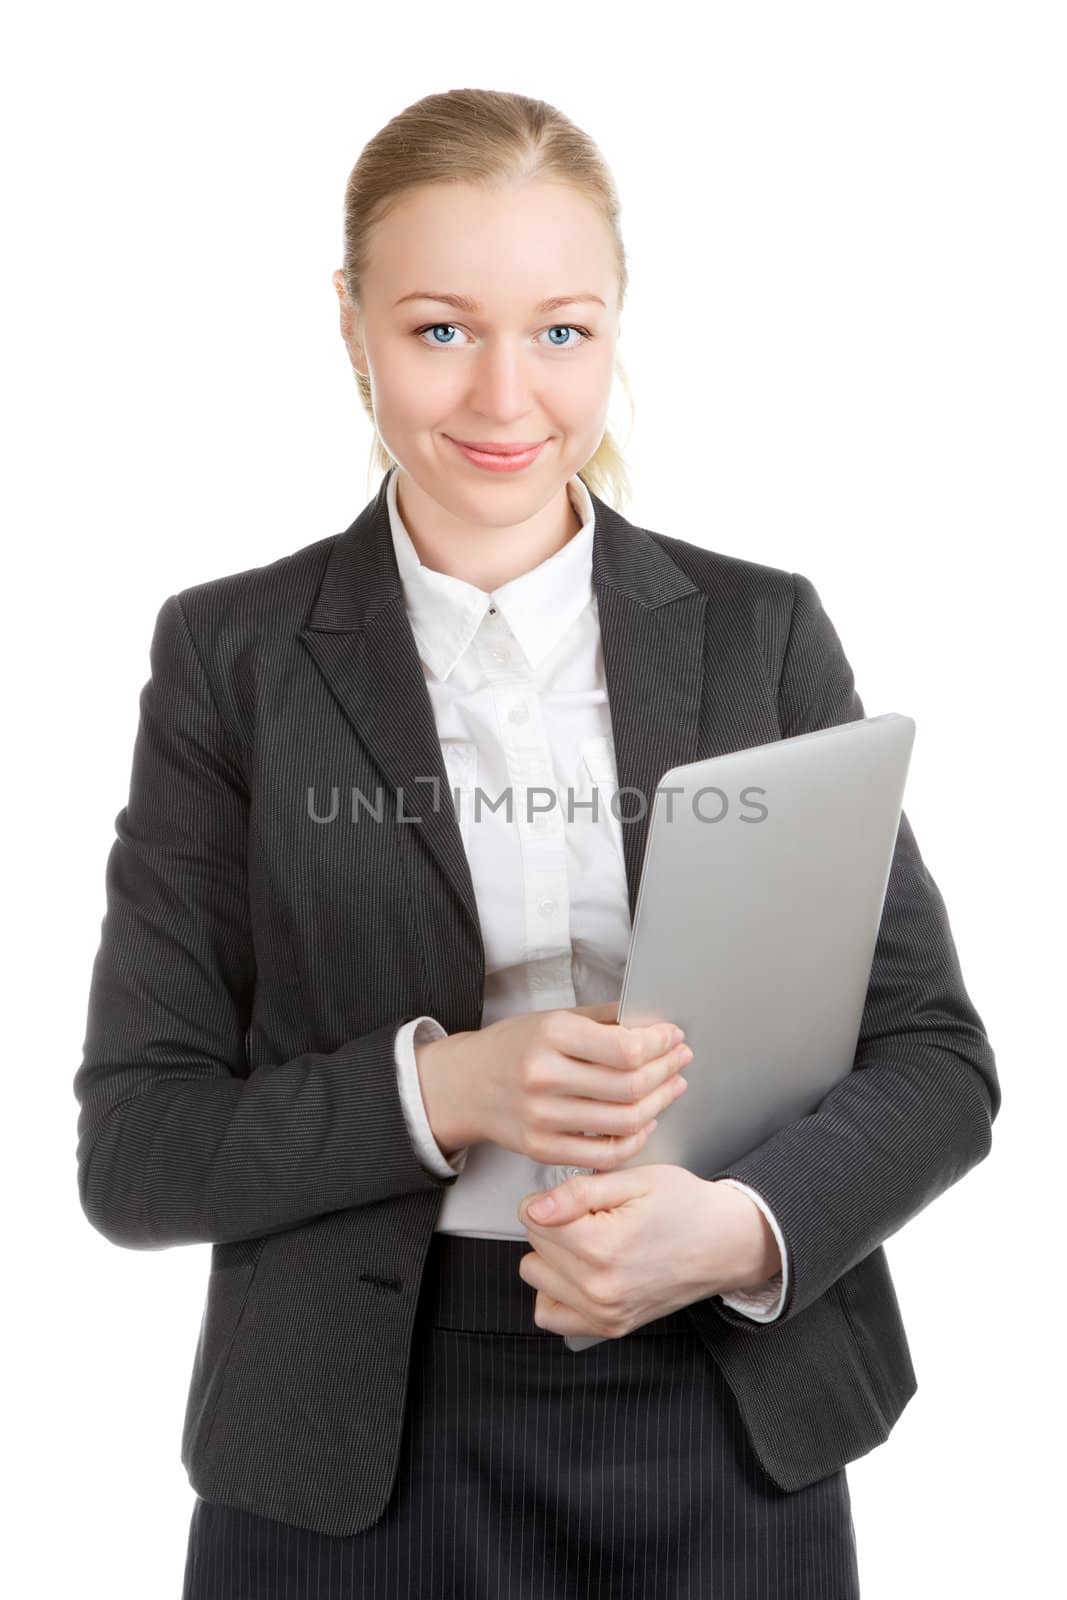 happy business woman with laptop, isolated on white